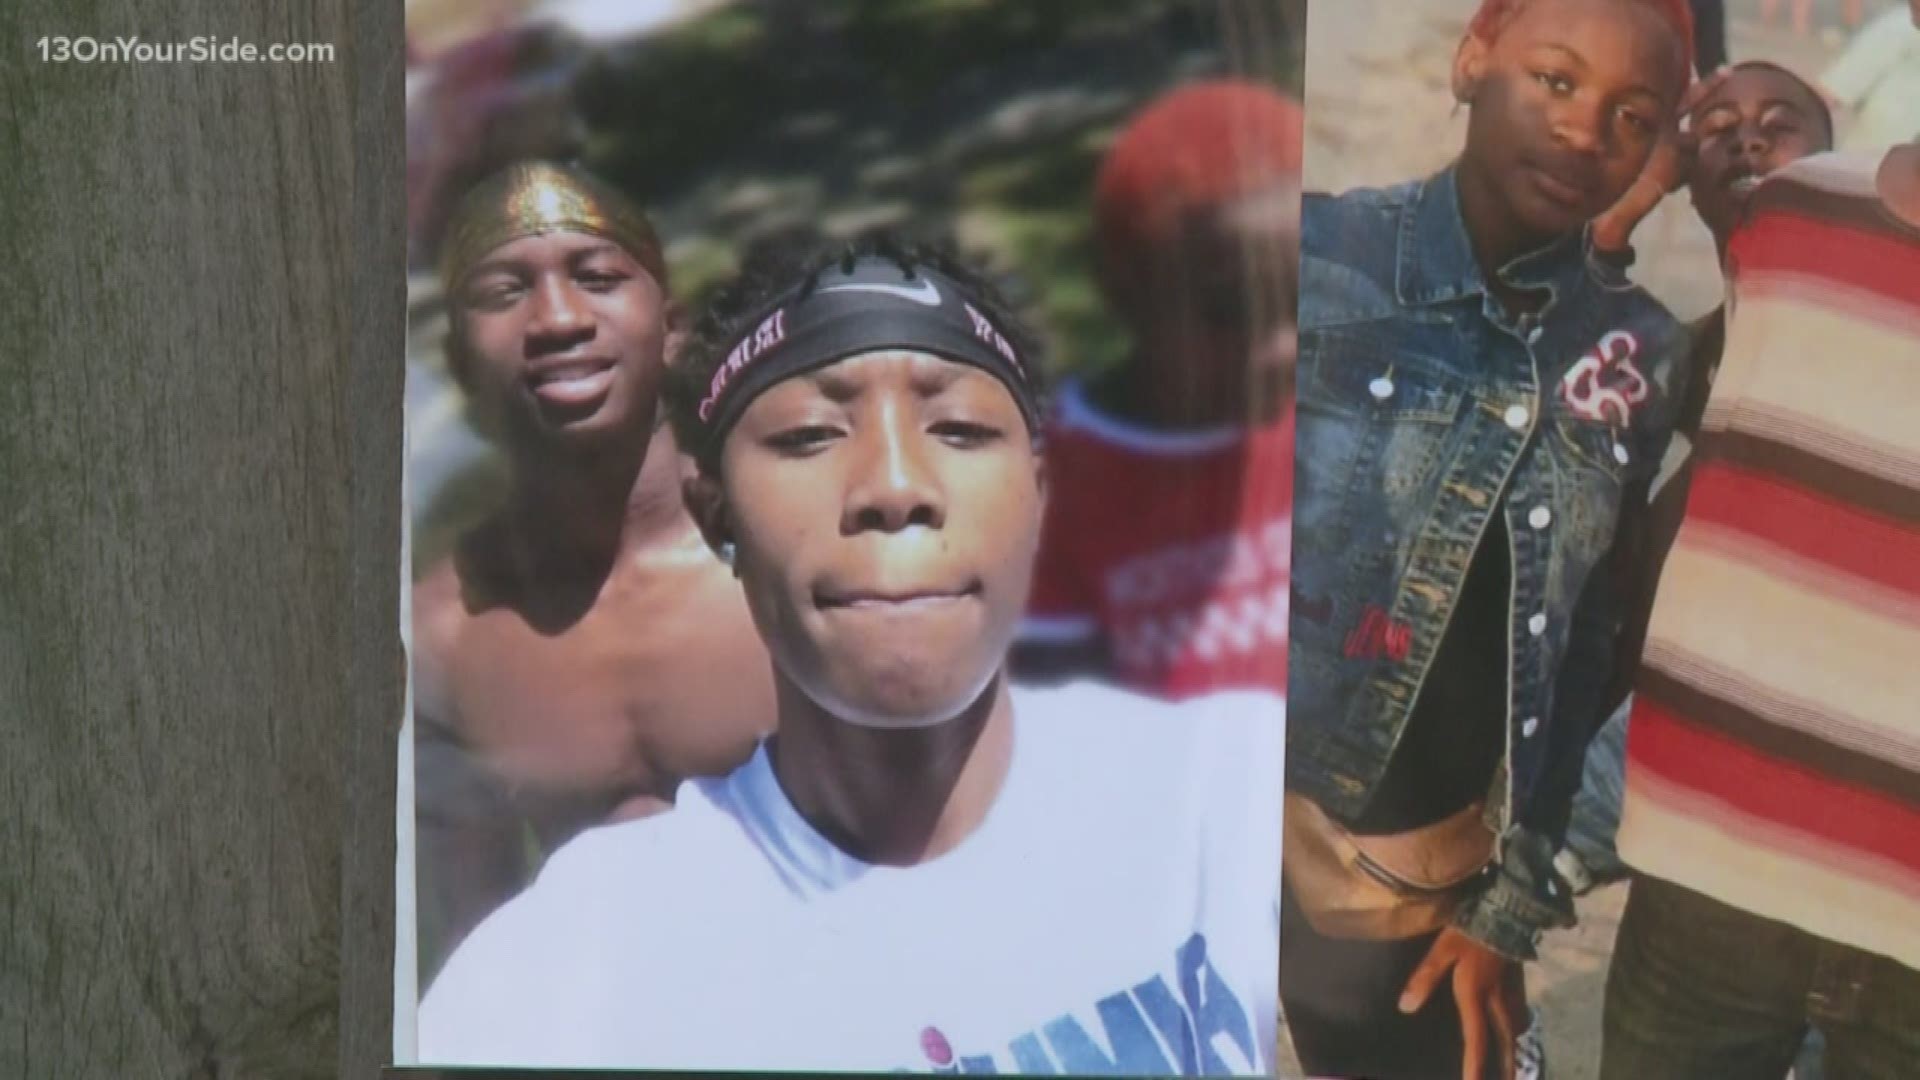 Prosecutor D.J. Hilson will be holding a press conference Wednesday morning to provide updates on the shooting death of 16-year-old Zamarian Cooper. Zamarian was shot and killed at a birthday party while shielding his sister from gunfire.